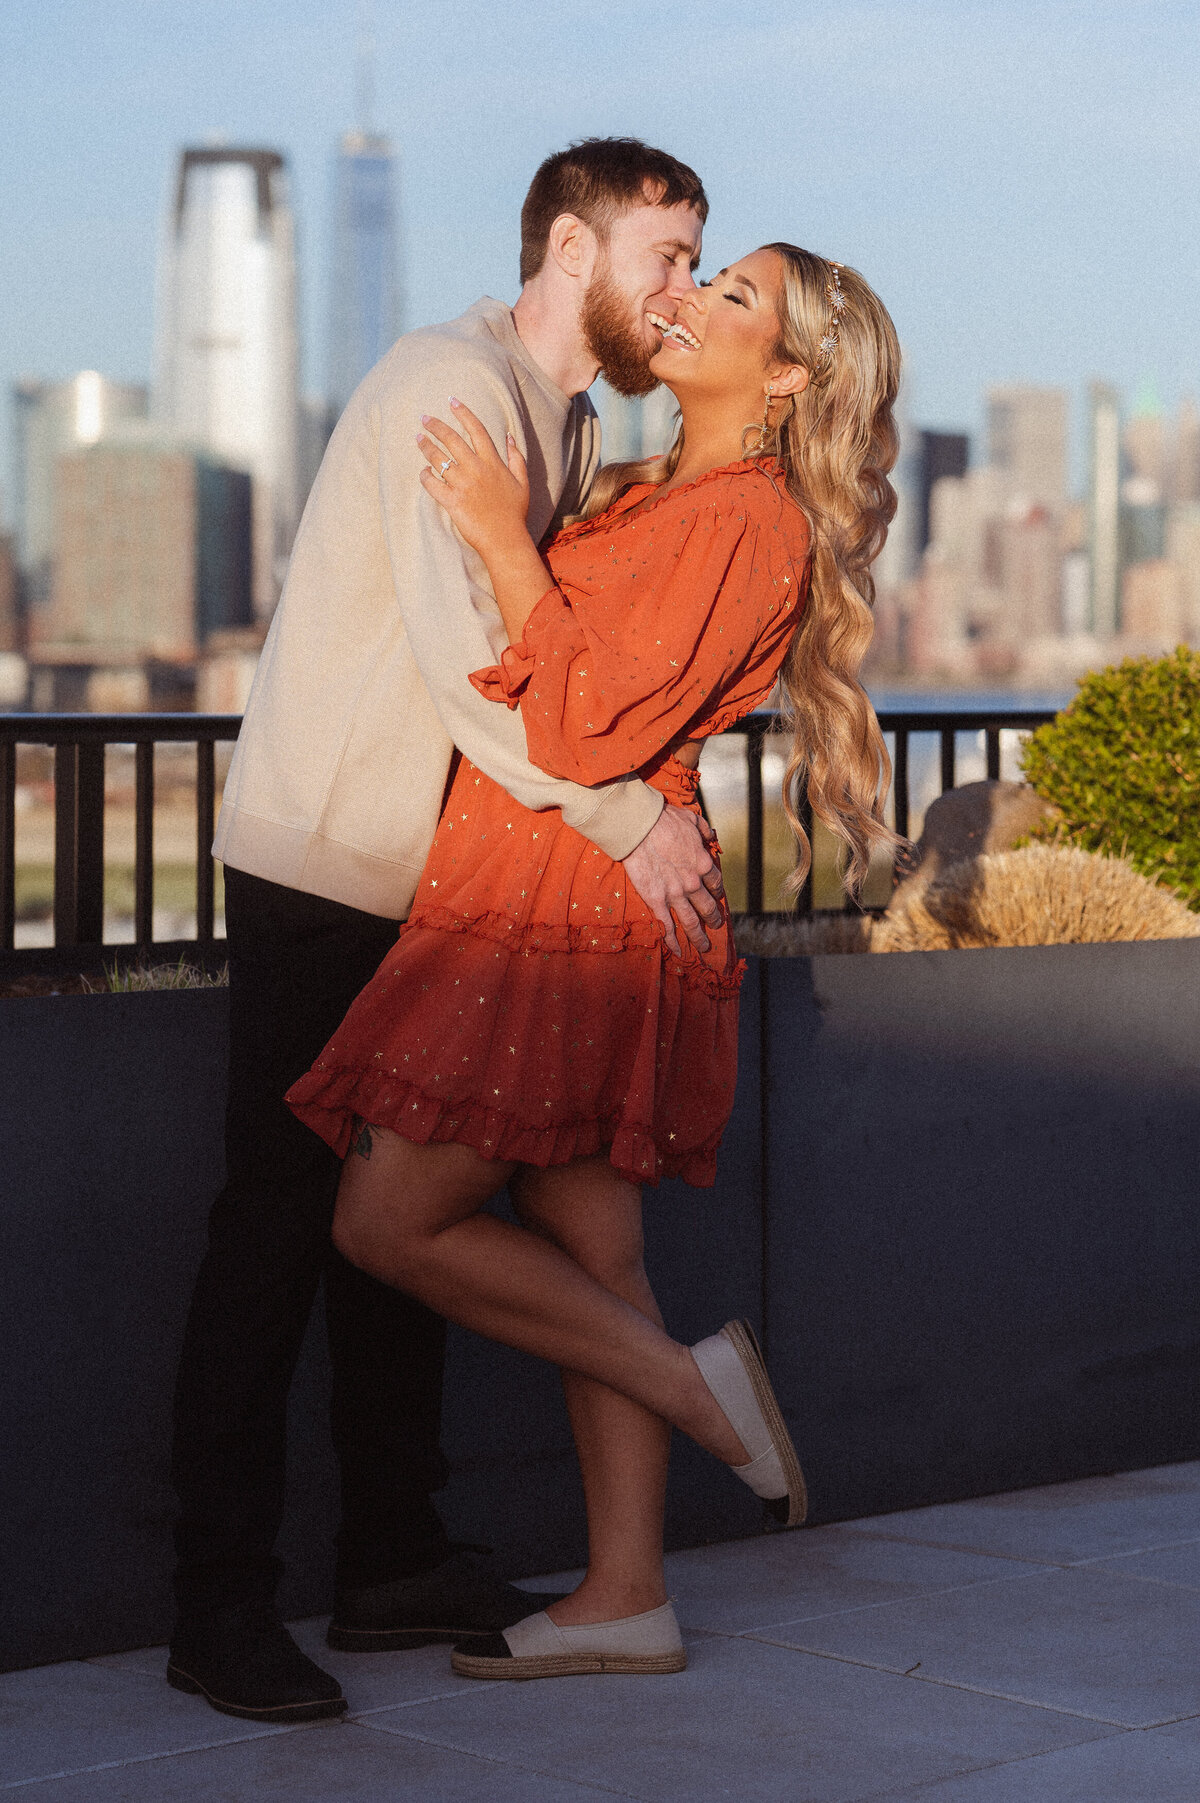 jersey-city-nj-engagement-photos-on-rooftop-with-nyc-skyline-views-by-suess-moments-photography (1 of 3)